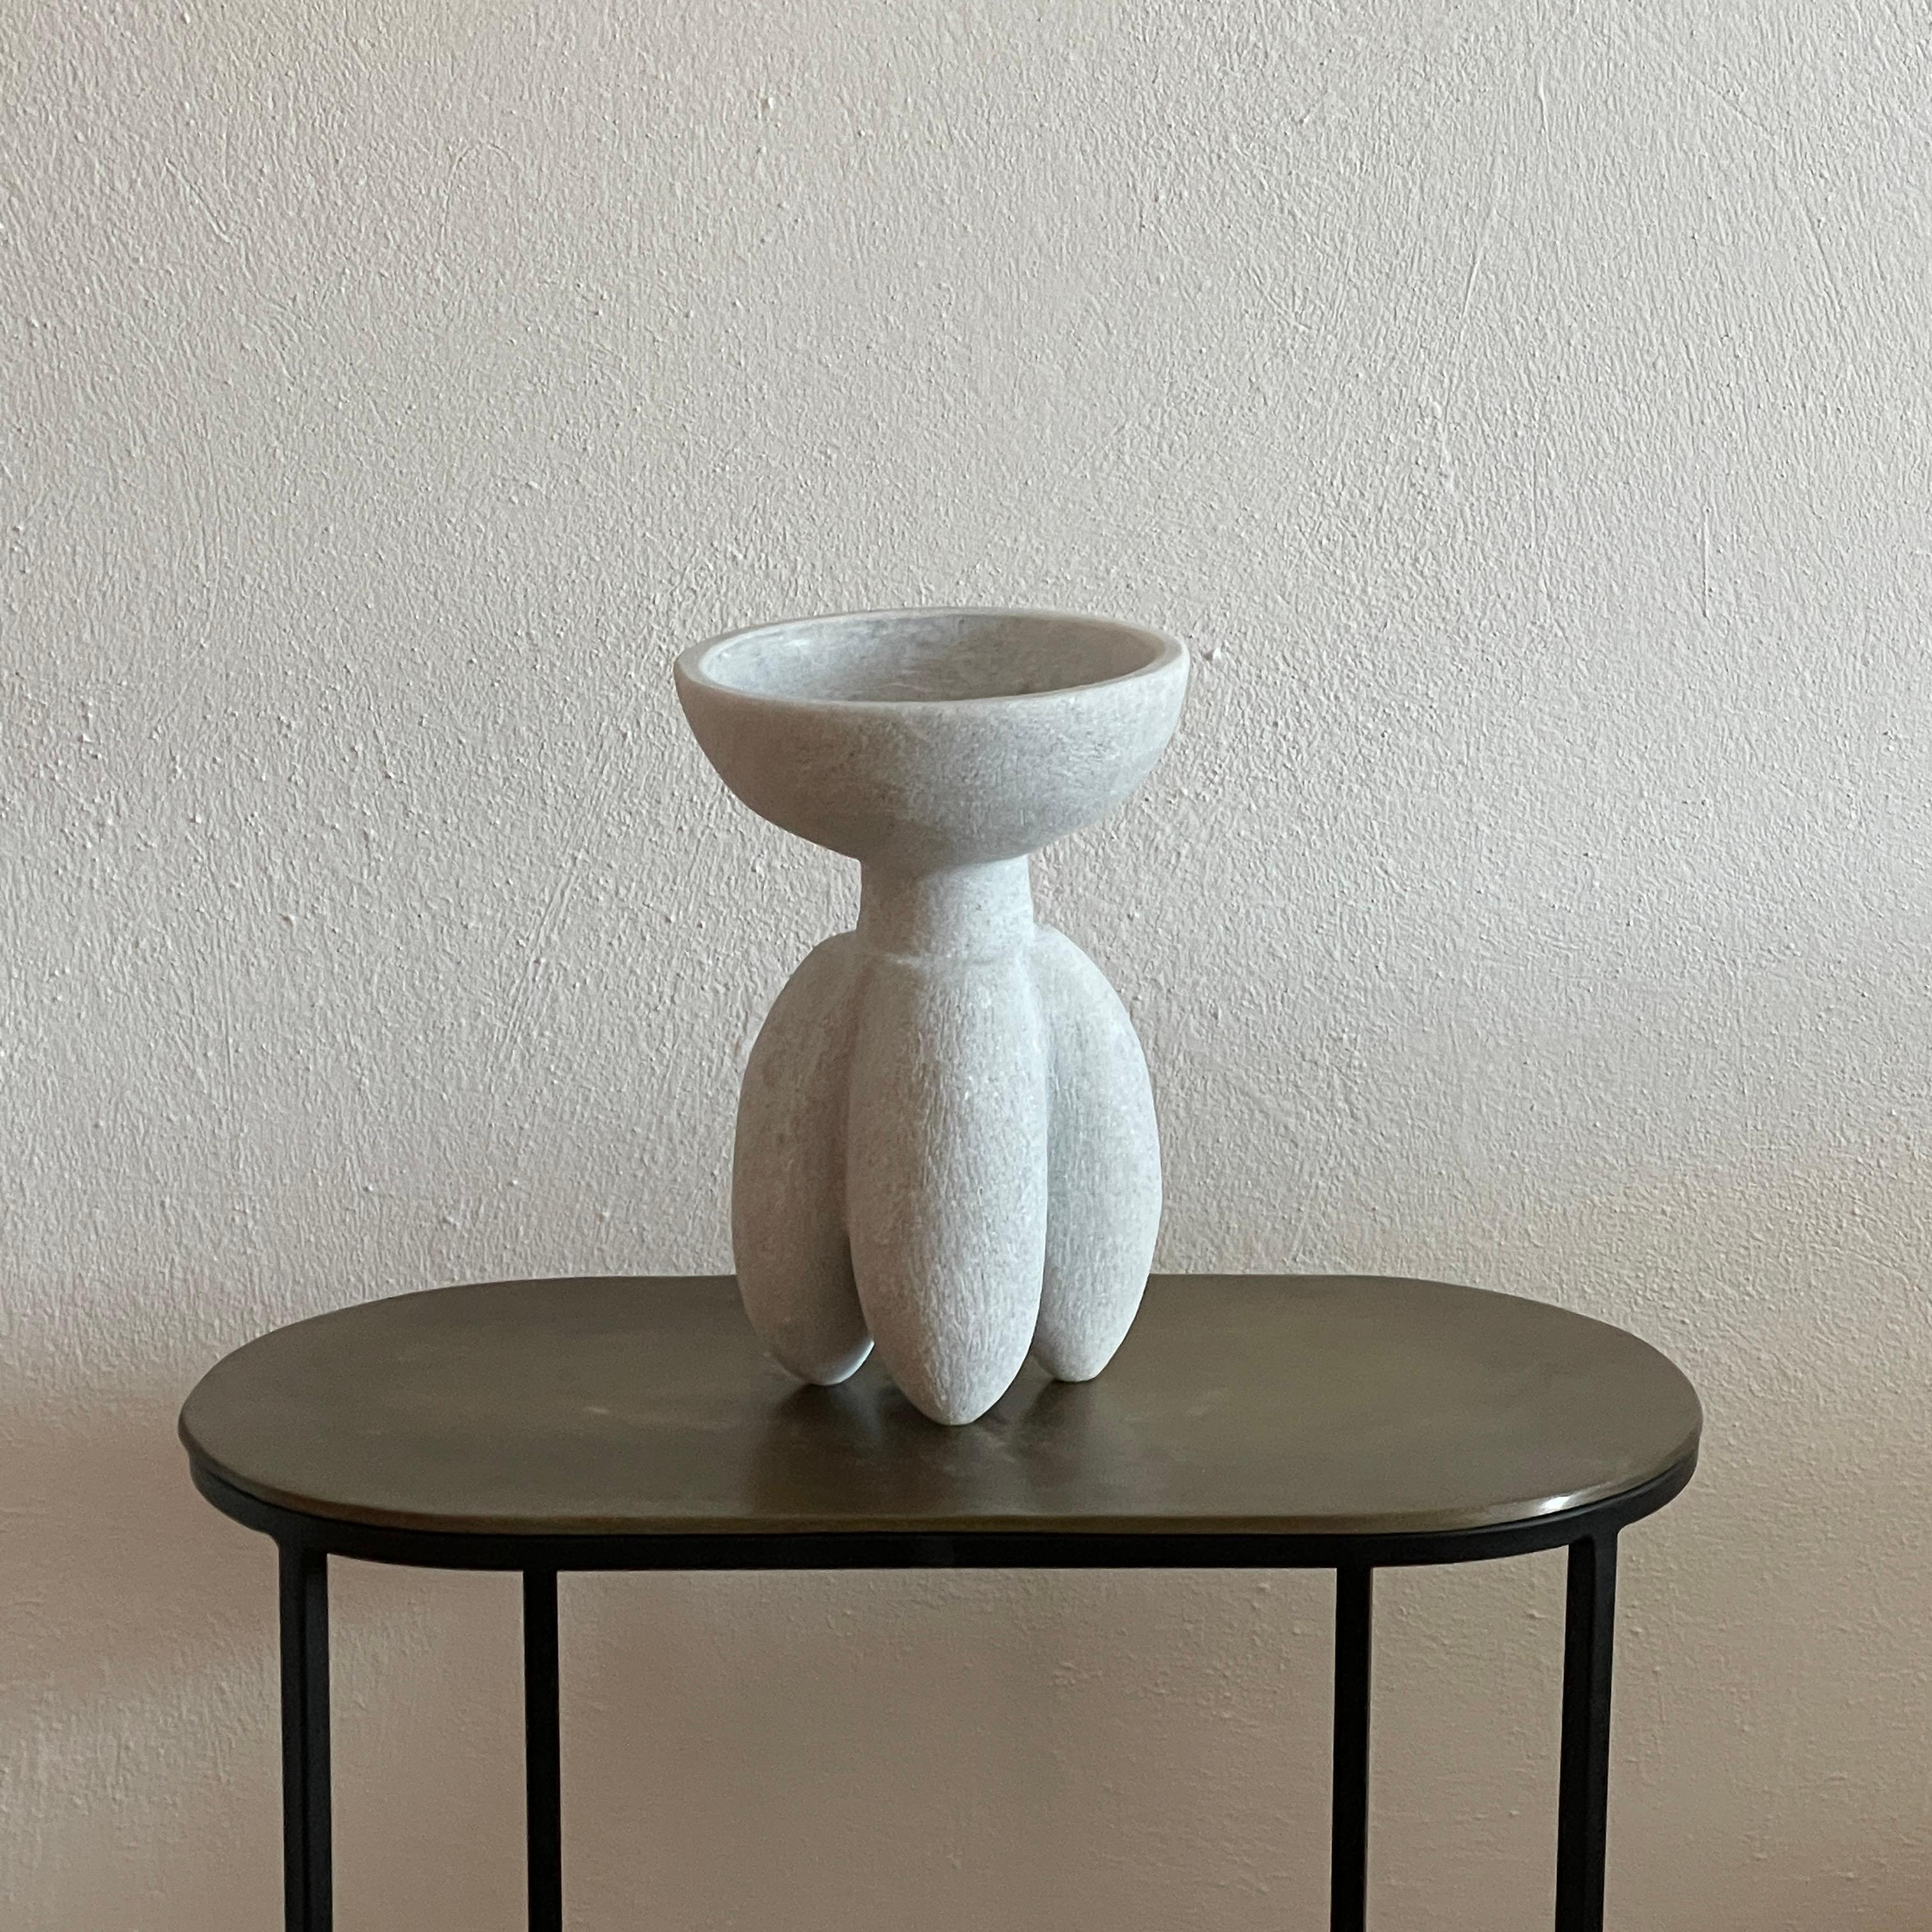 Hand carved marble vessel by Tom Von Kaenel.
Materials: marble.
Dimensions: W 17 x D 17 x H 28 cm.

Tom von Kaenel, sculptor and painter, was born in Switzerland in 1961. Already in his early
childhood he was deeply devoted to art. His desire